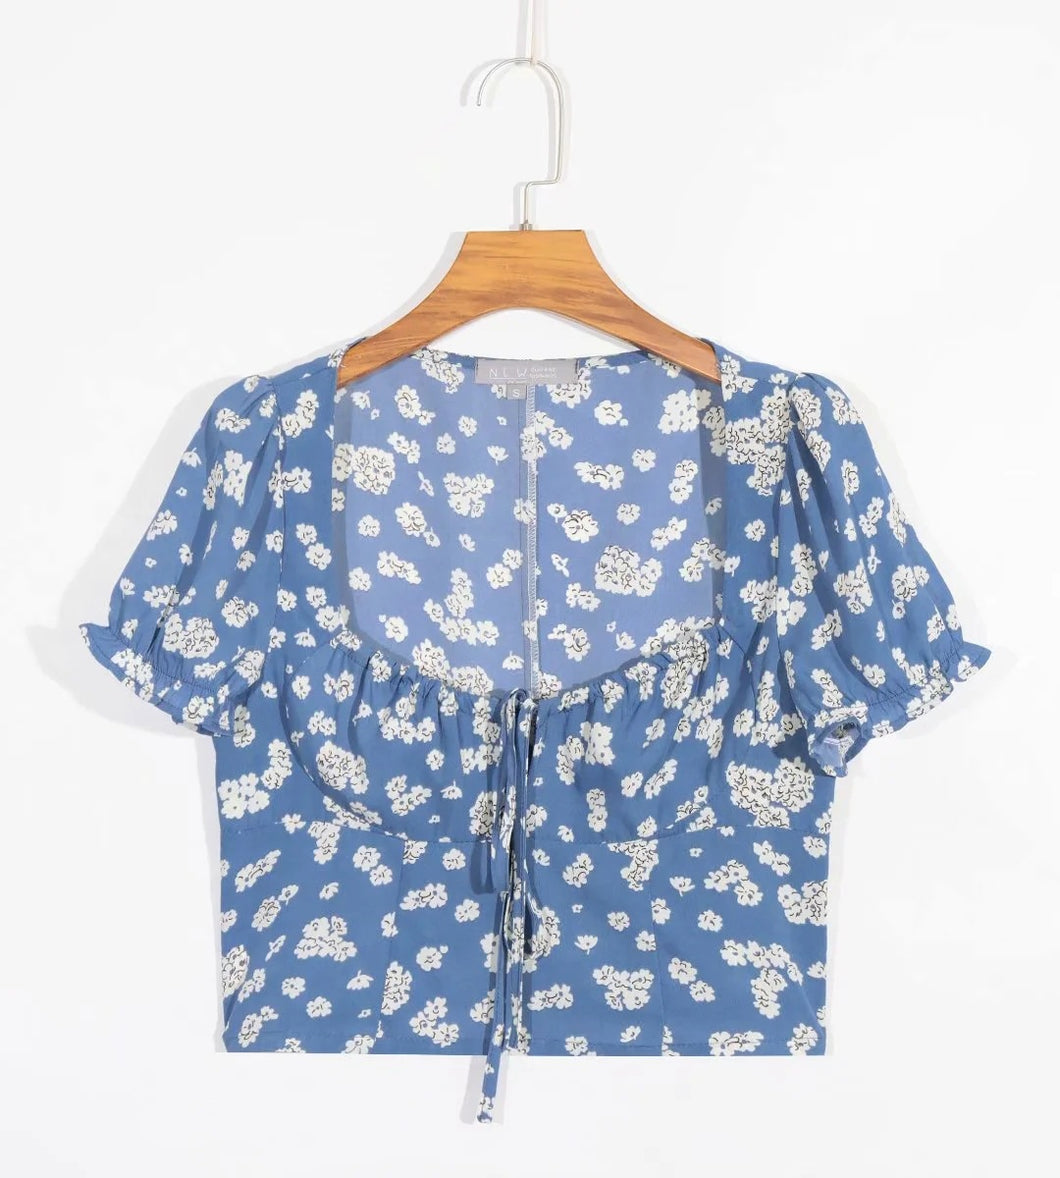 New Printed Short-sleeved Sexy Lace-up Shirt In Summer